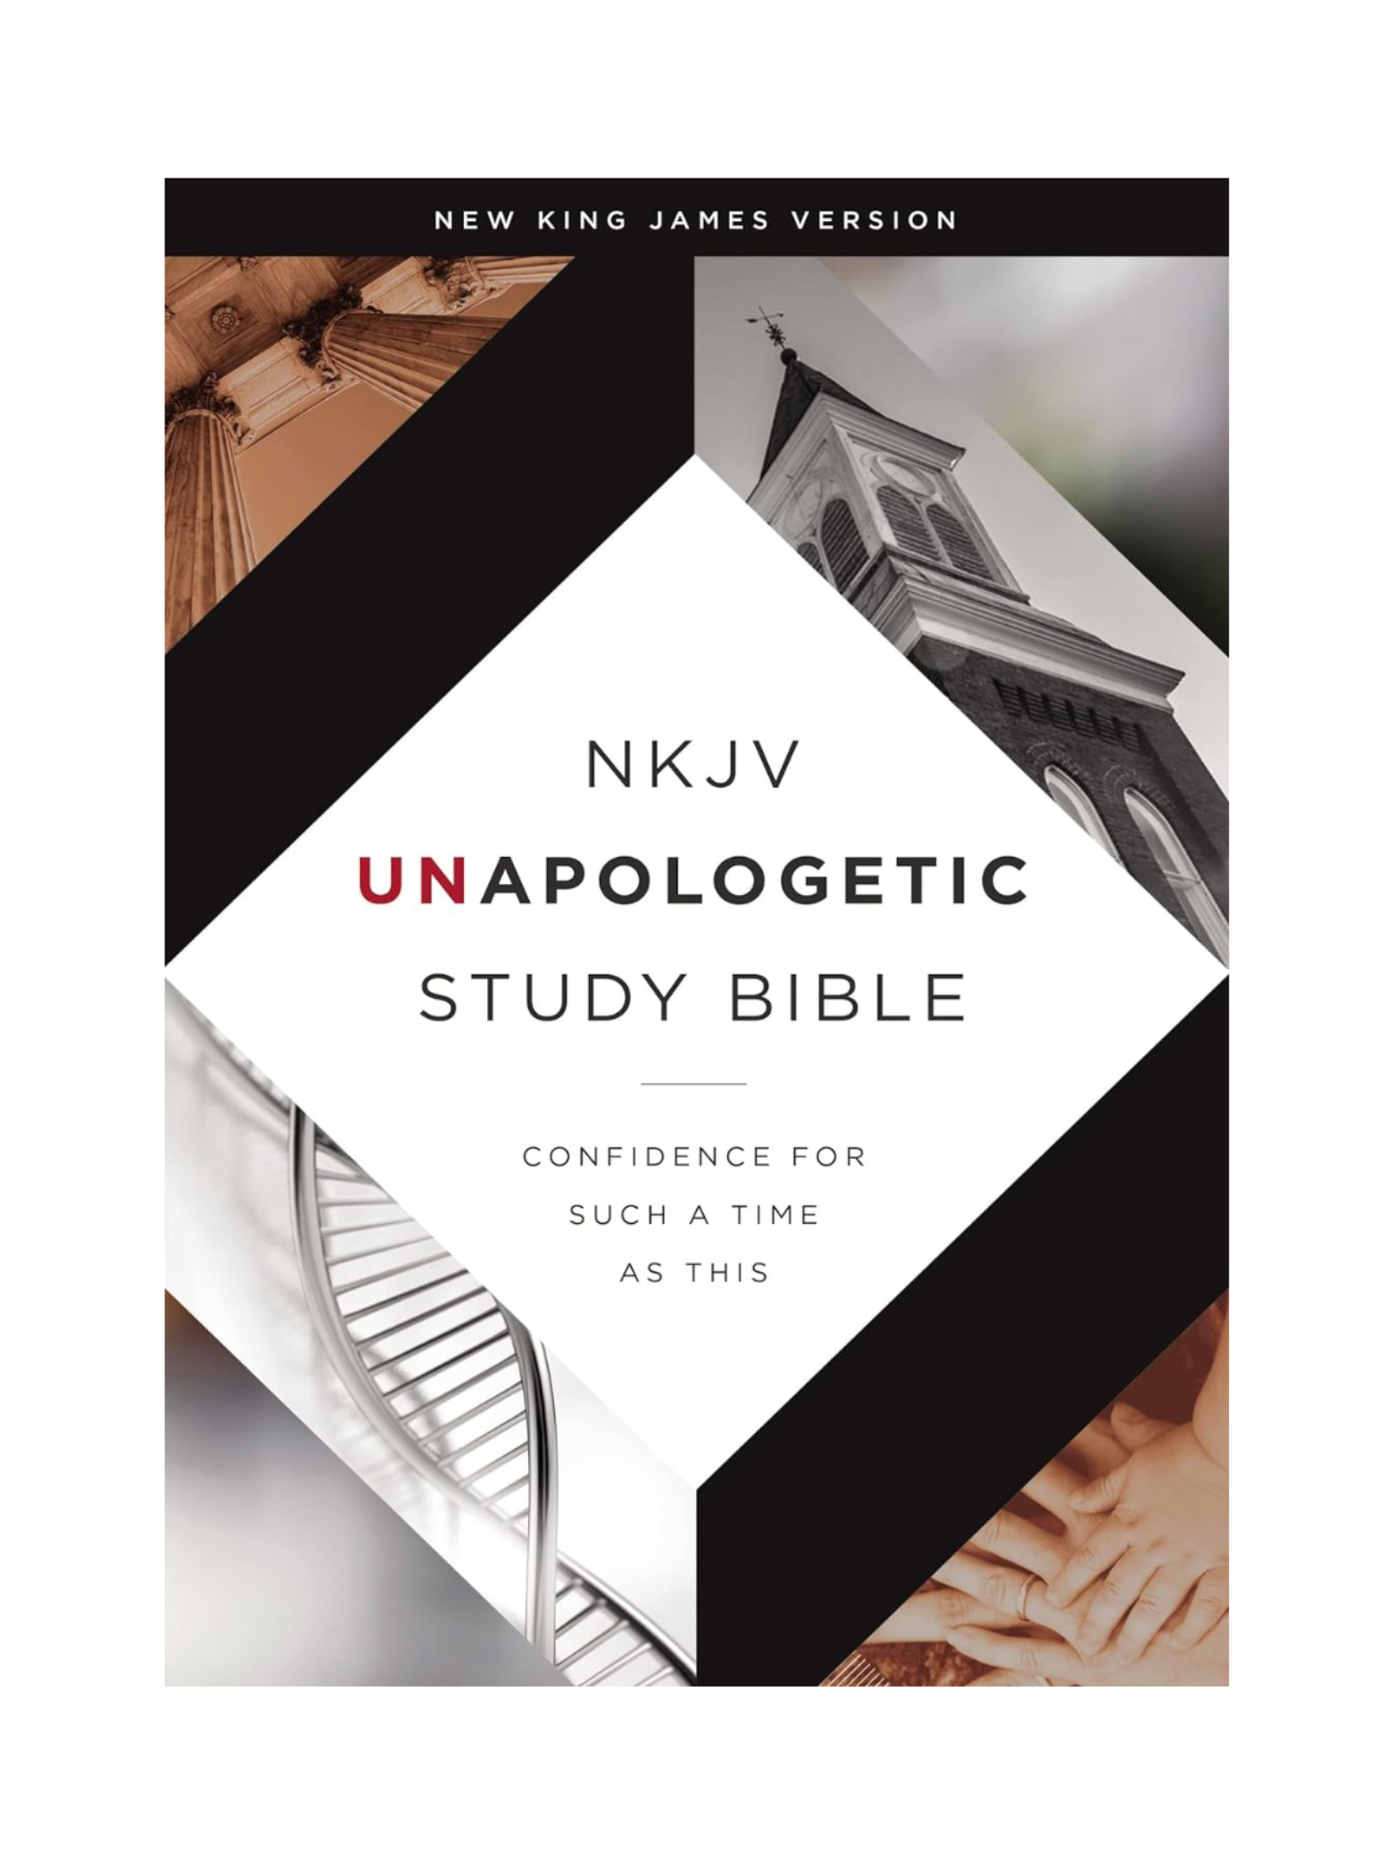 NKJV Unapologetic Study Bible front.